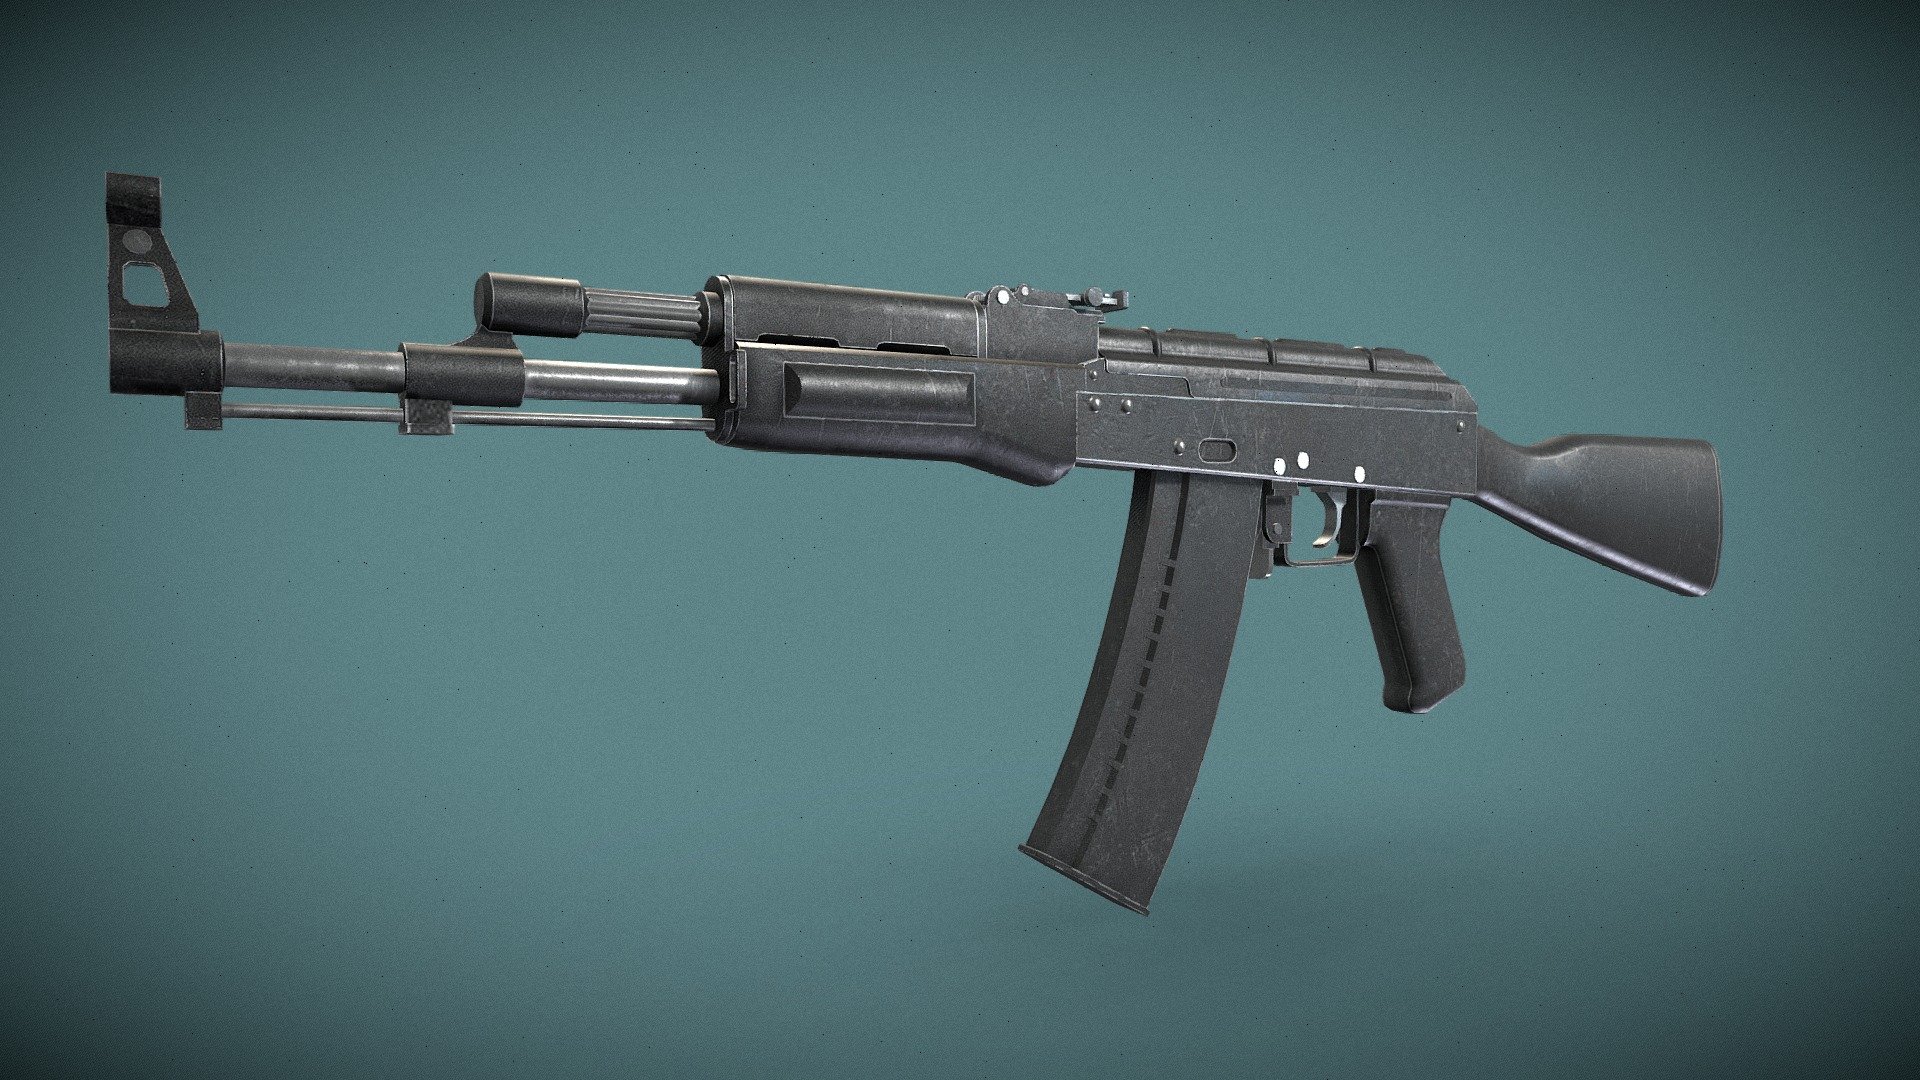 AK-47 in black painted steel style.
Game ready low poly model
1 UV / PBR texture set - AK-47 Black - Download Free 3D model by A.I.R (@air3ddd) 3d model